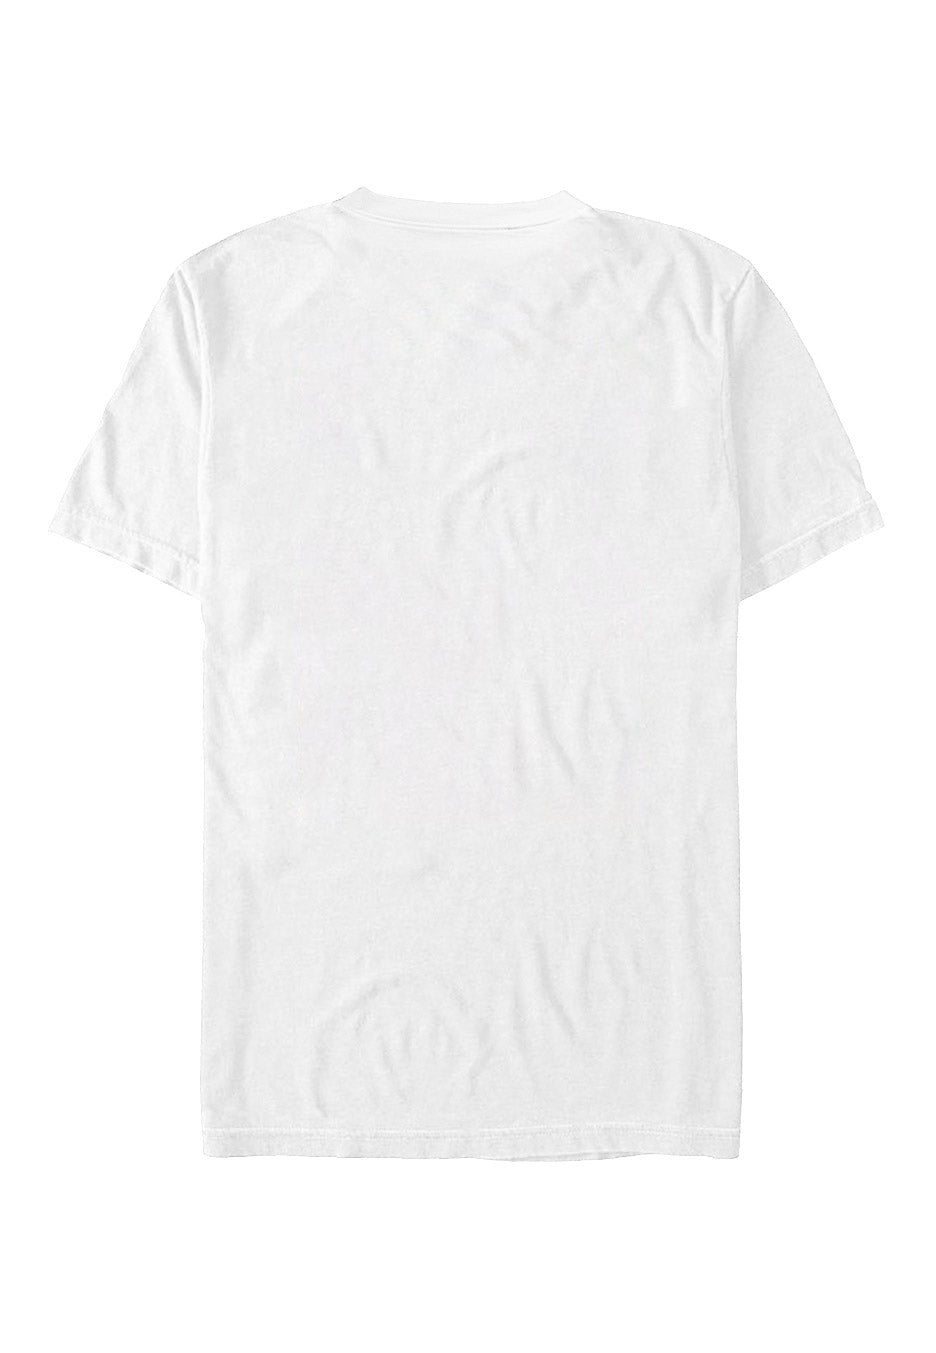 Nasty - Face Of Humanity White - T-Shirt